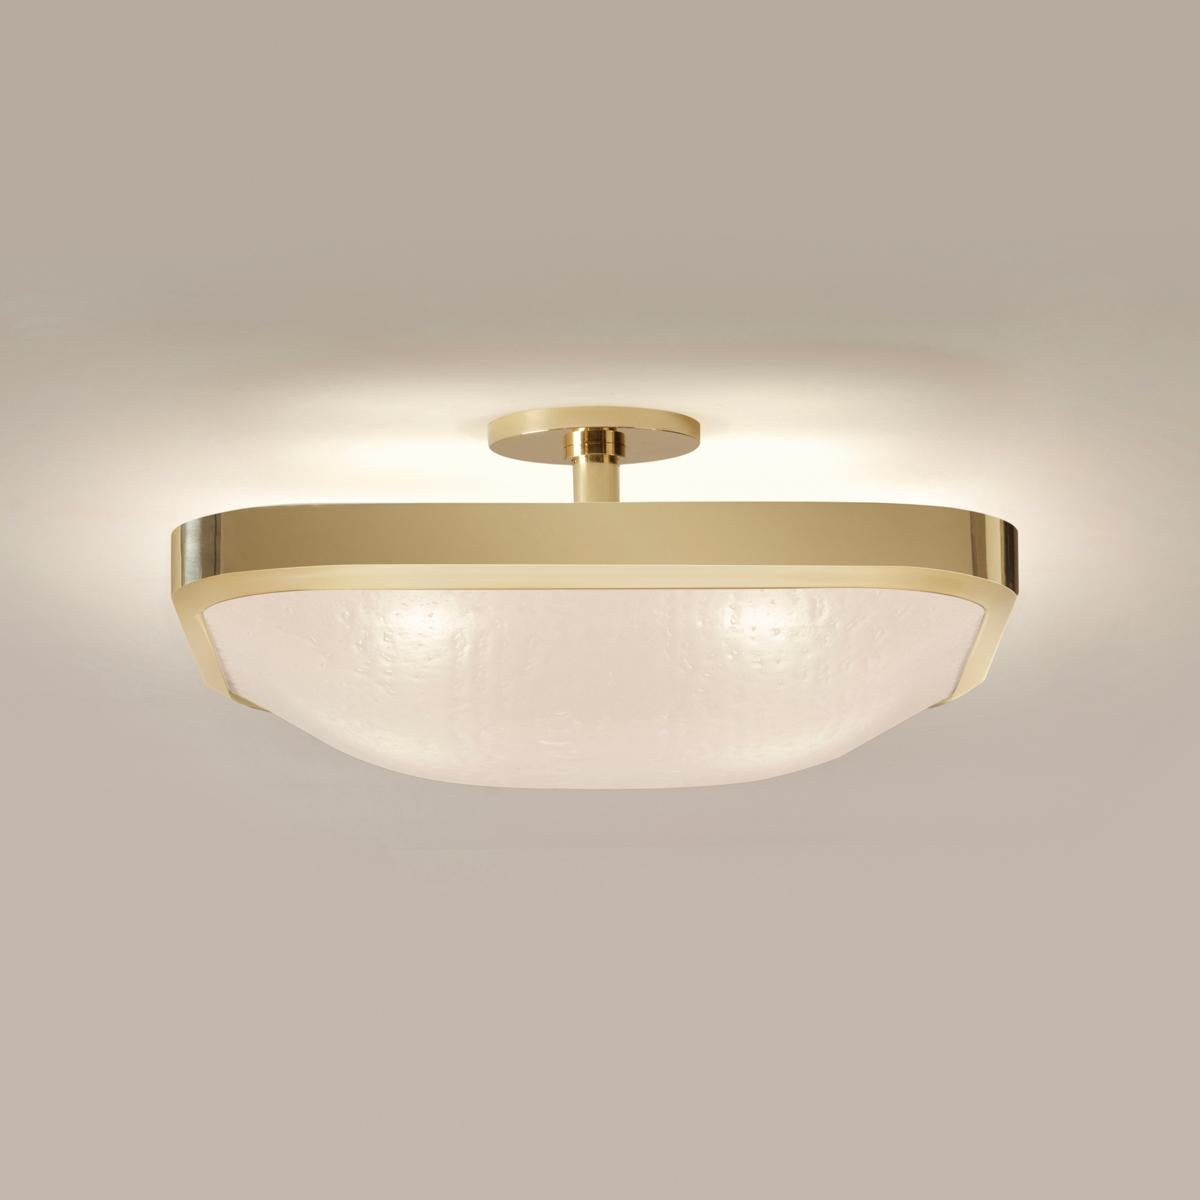 Uno Square Ceiling Light by Gaspare Asaro-Bronze Finish In New Condition For Sale In New York, NY